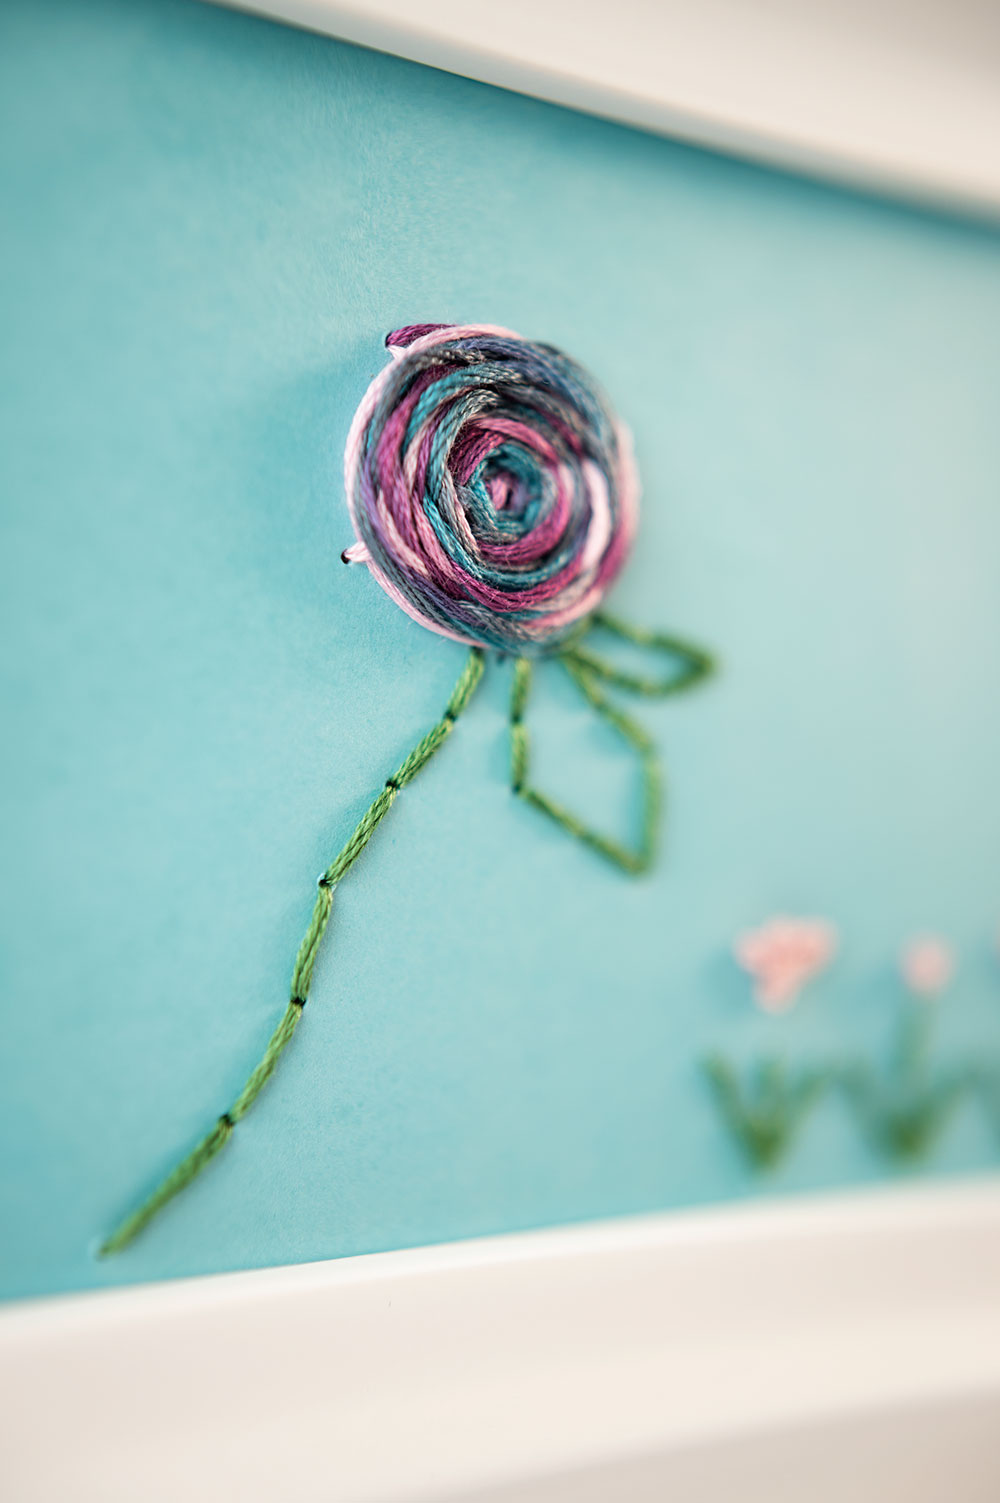 closeup view of the woven wheel rose and back stitch stem